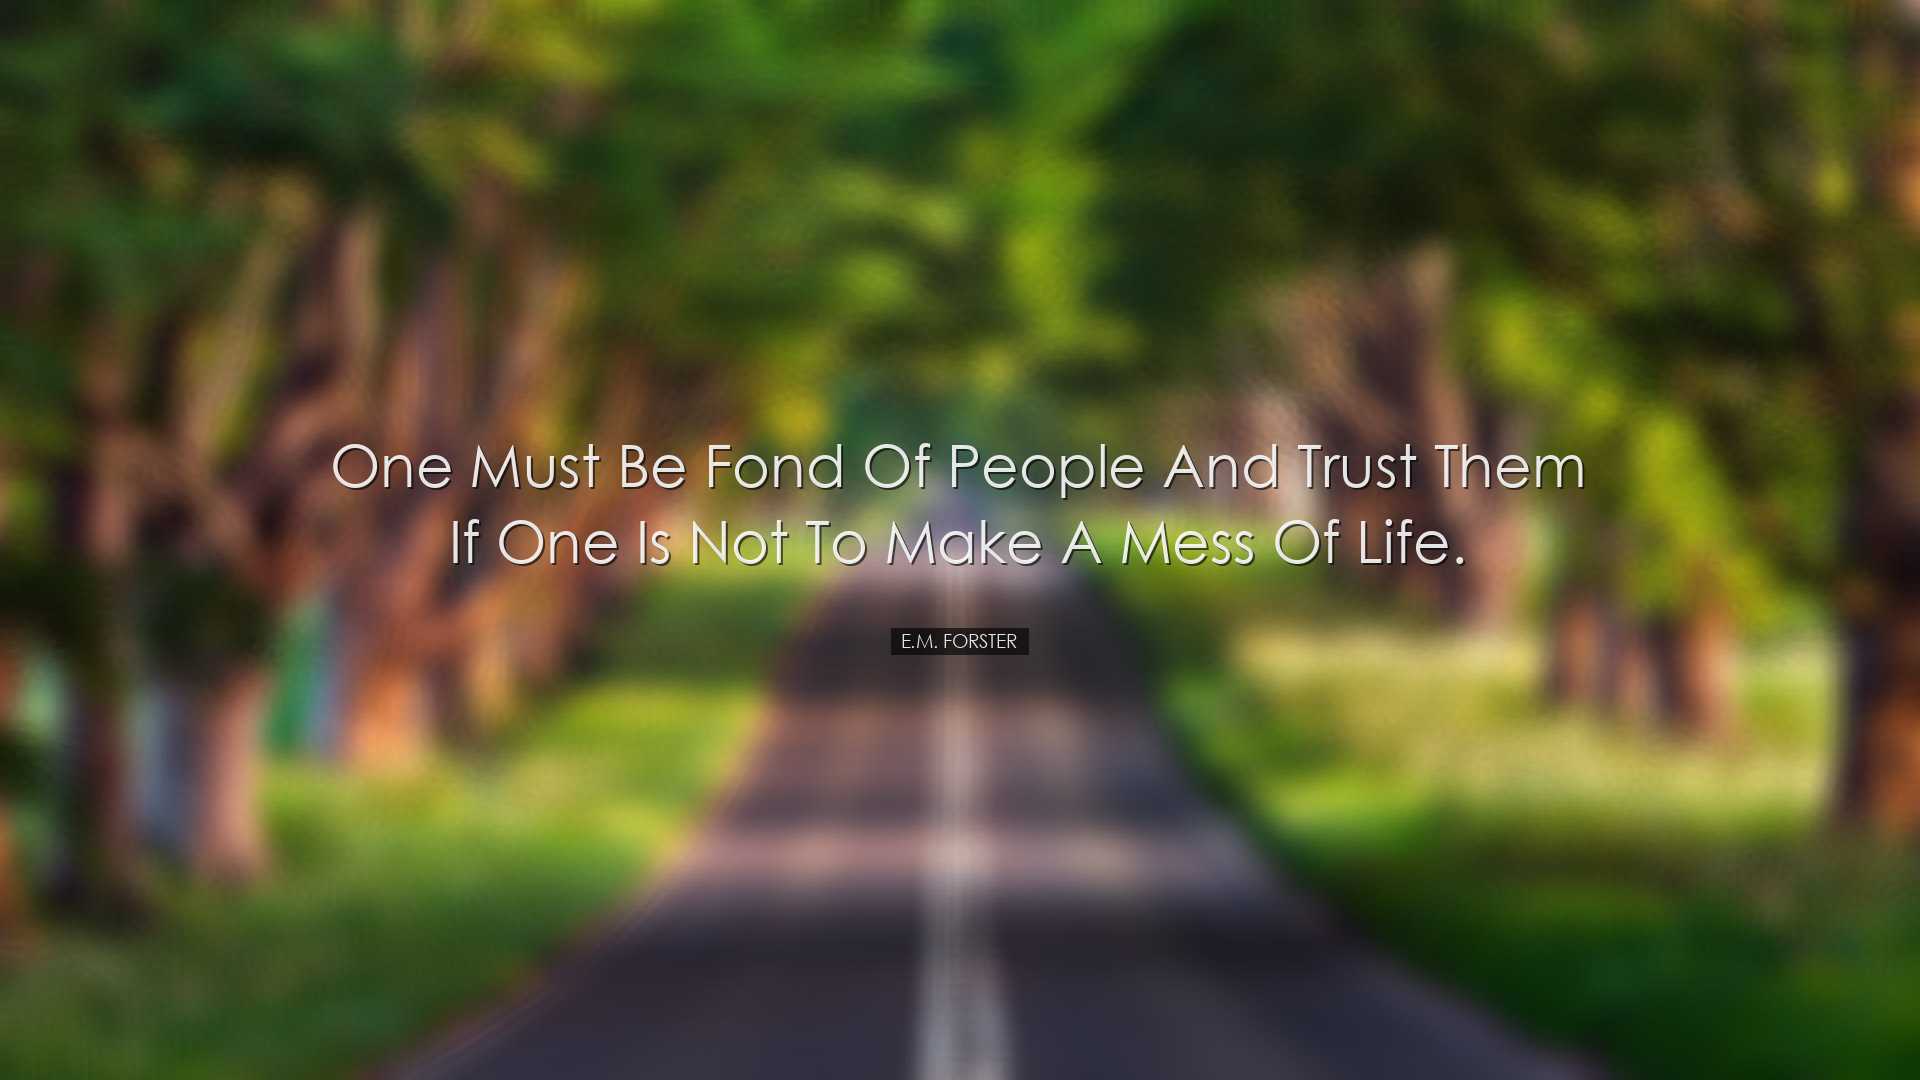 One must be fond of people and trust them if one is not to make a